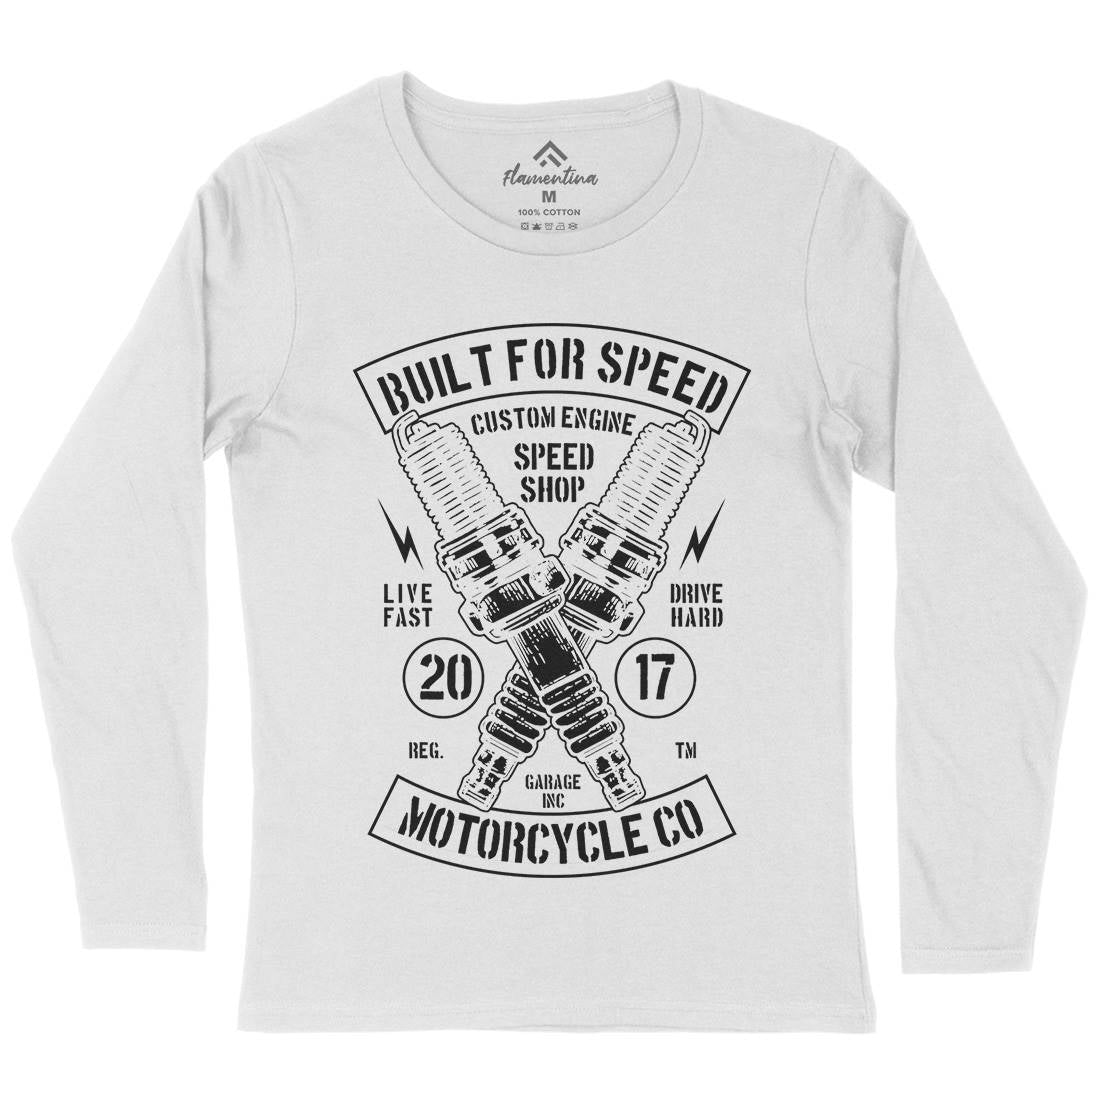 Built For Speed Womens Long Sleeve T-Shirt Motorcycles B188